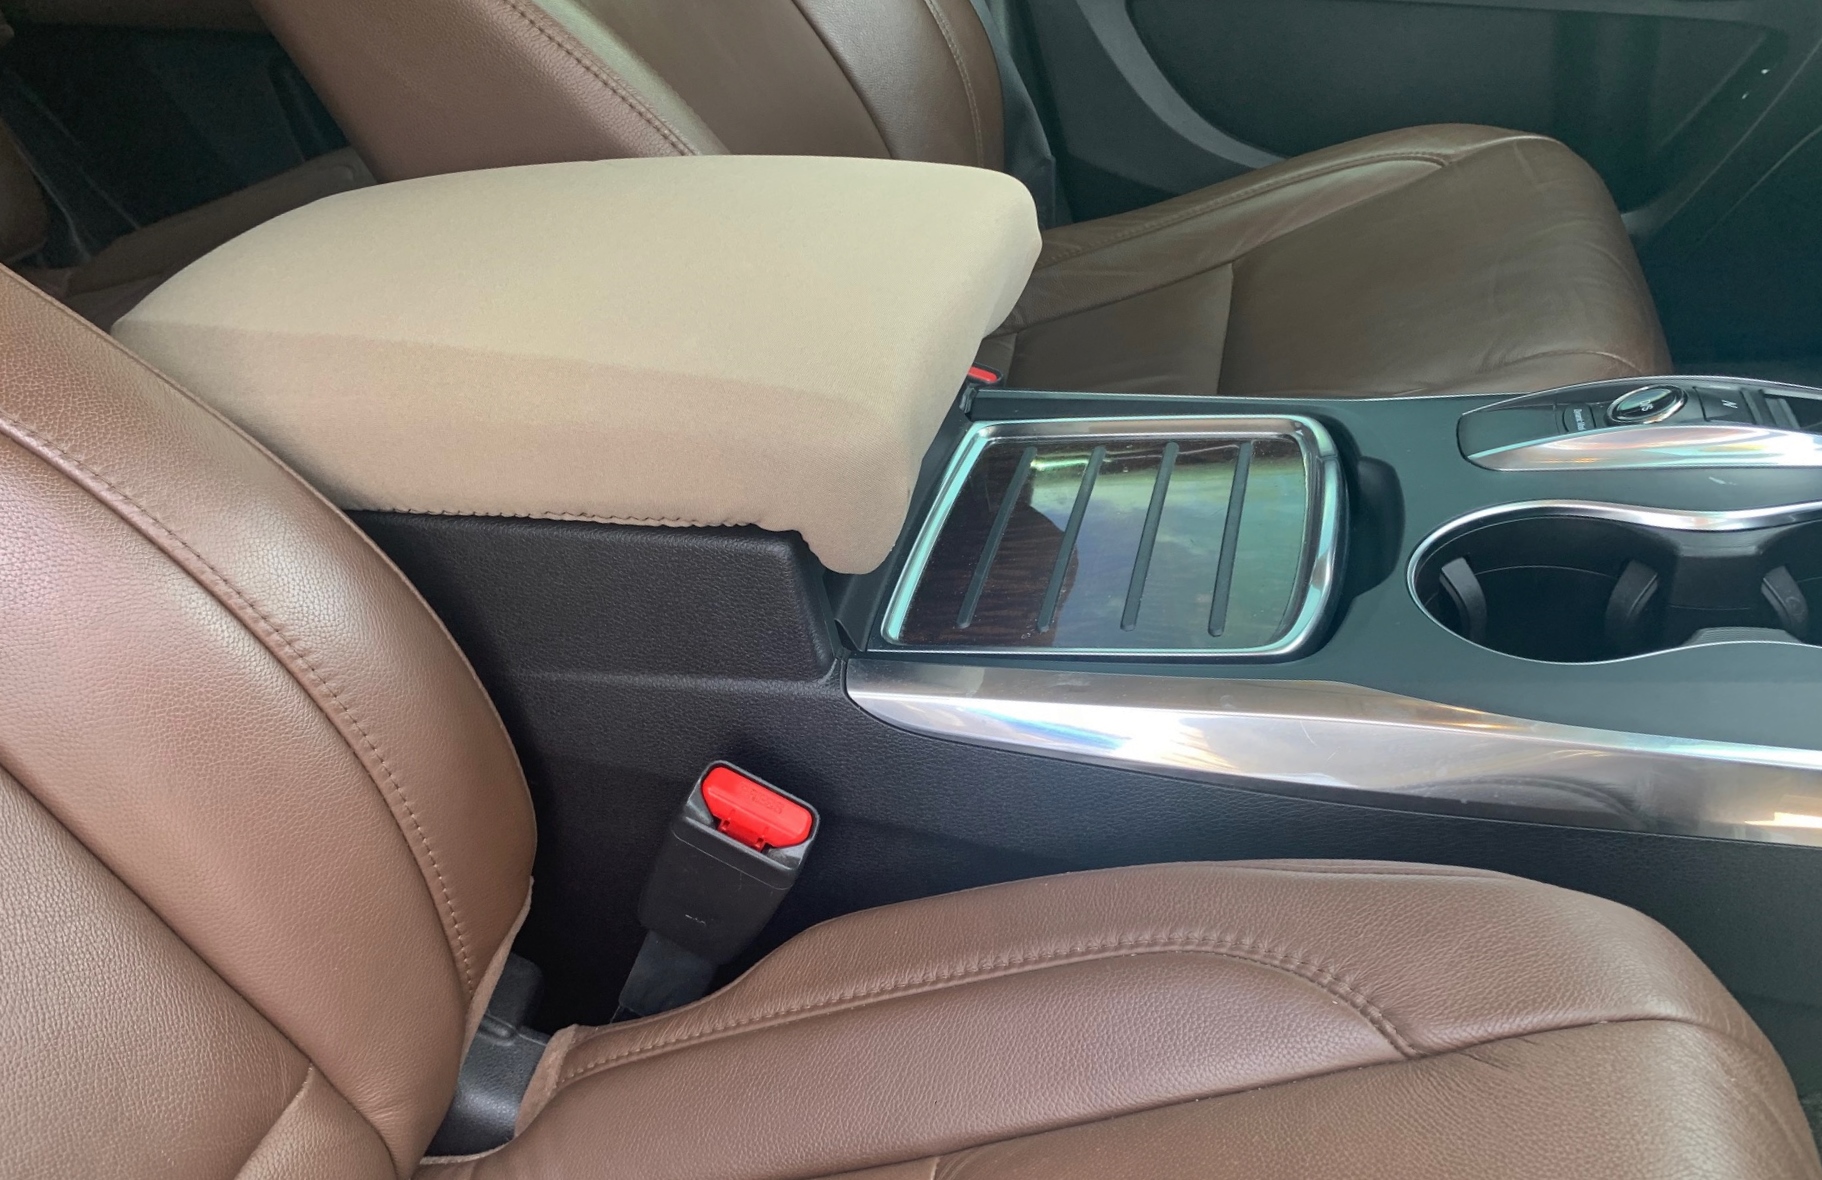 Buy Neoprene Center Console Armrest Cover fits the Acura MDX 2013-2023